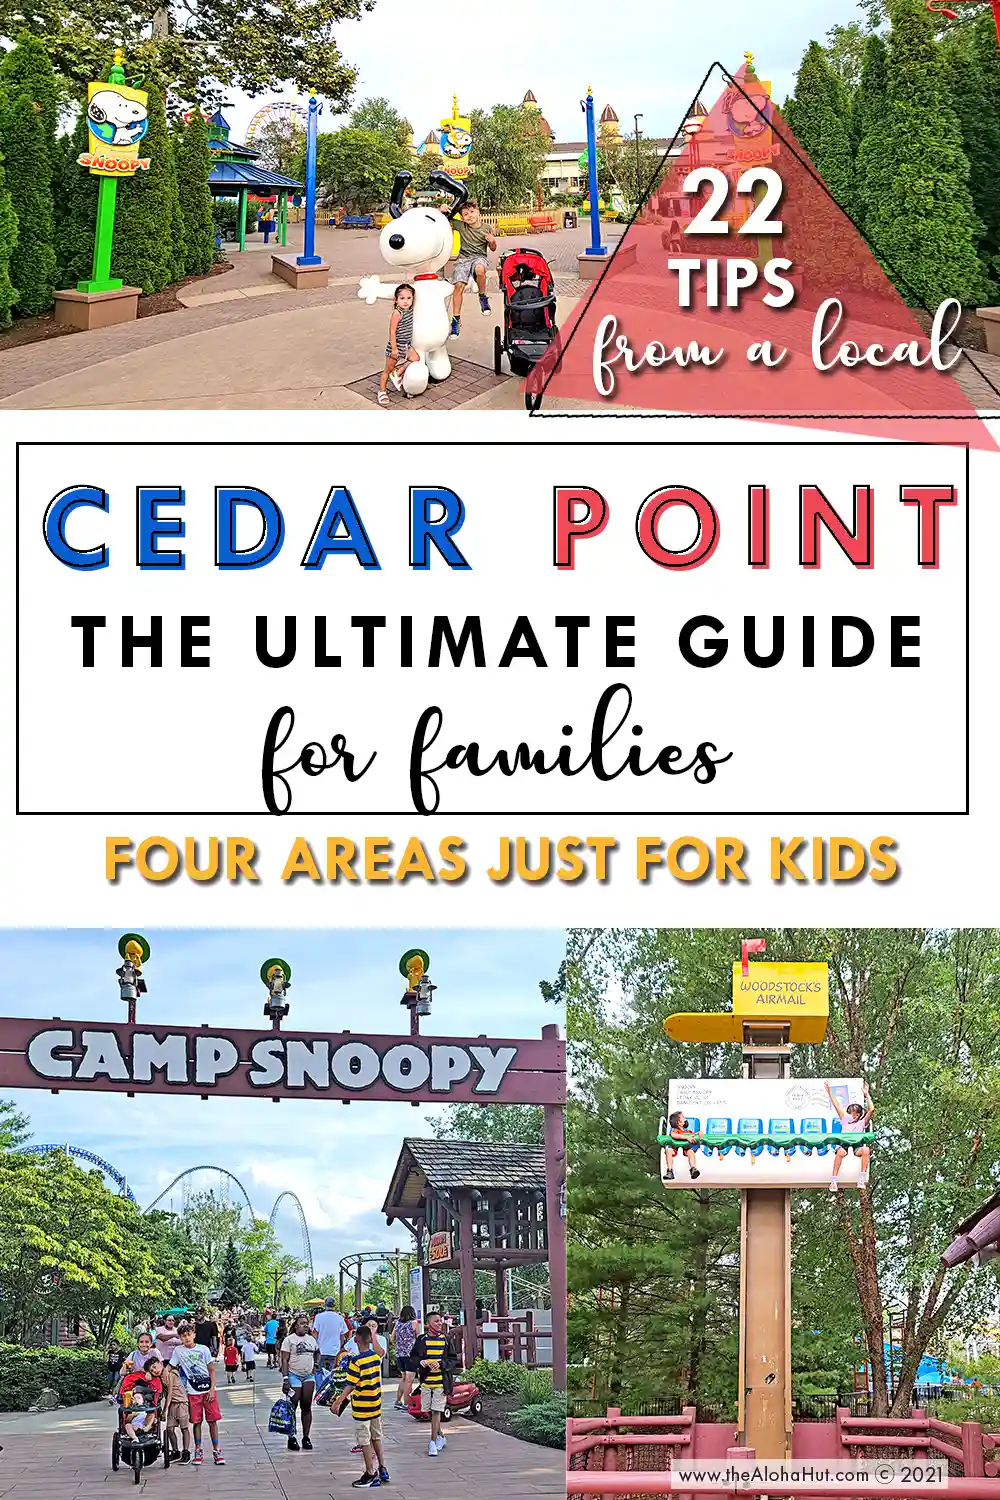 Cedar Point the Ultimate Guide for Families - Tips & Tricks - Camp Snoopy